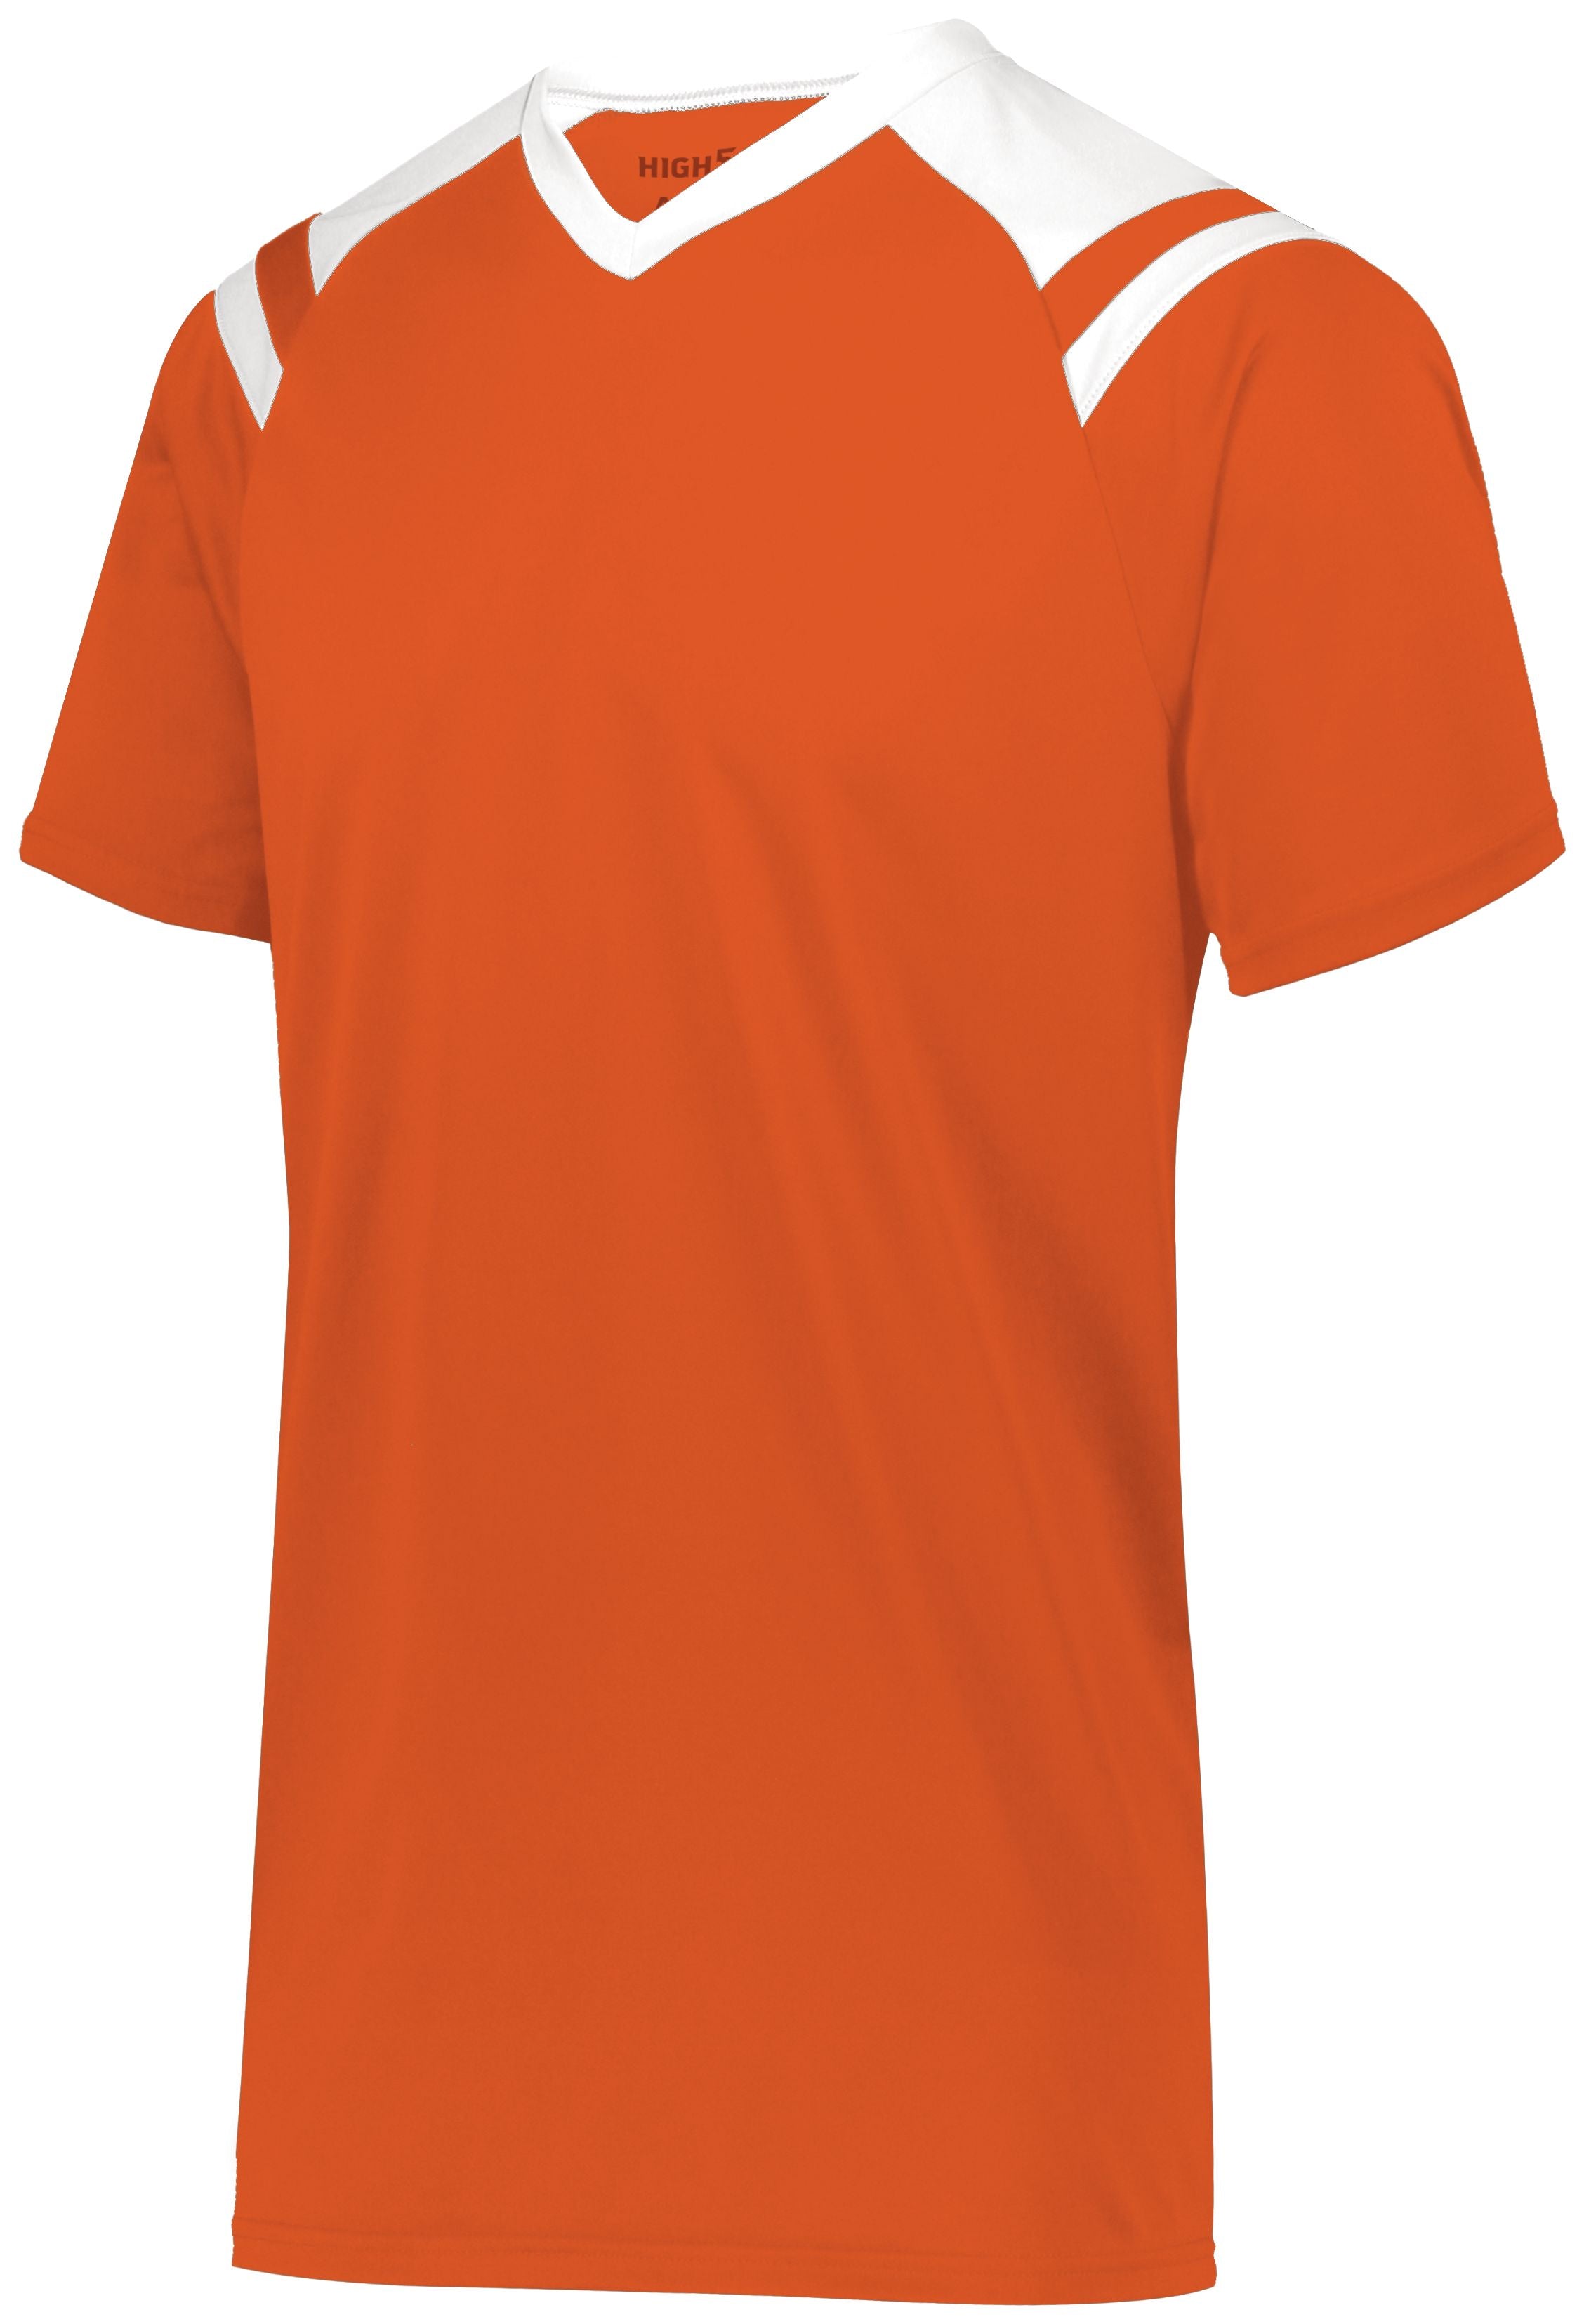 High 5 Sheffield Jersey in Orange/White  -Part of the Adult, Adult-Jersey, High5-Products, Soccer, Shirts, All-Sports-1, Sheffield-Soccer-Jerseys product lines at KanaleyCreations.com